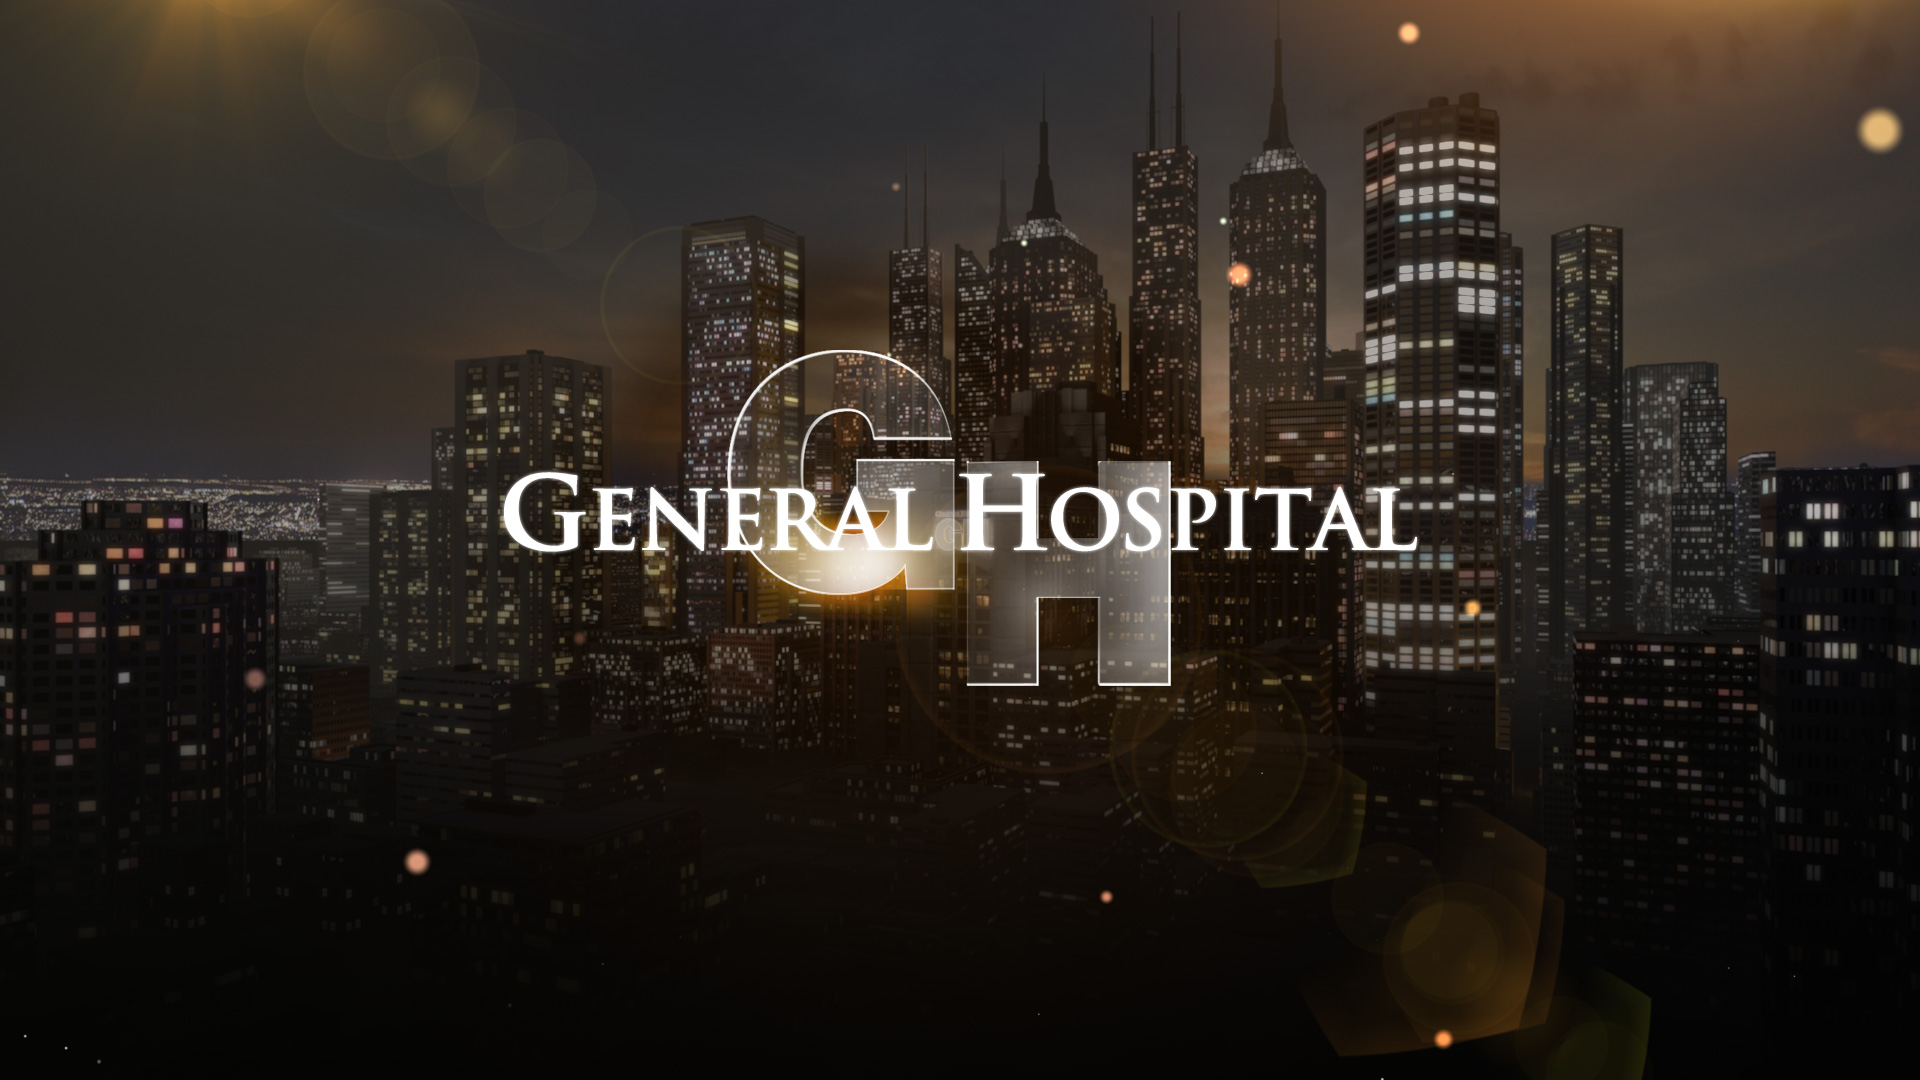 General Hospital Season 58 Sonny Is Back And Furious Limo Explodes Shakes Up PC